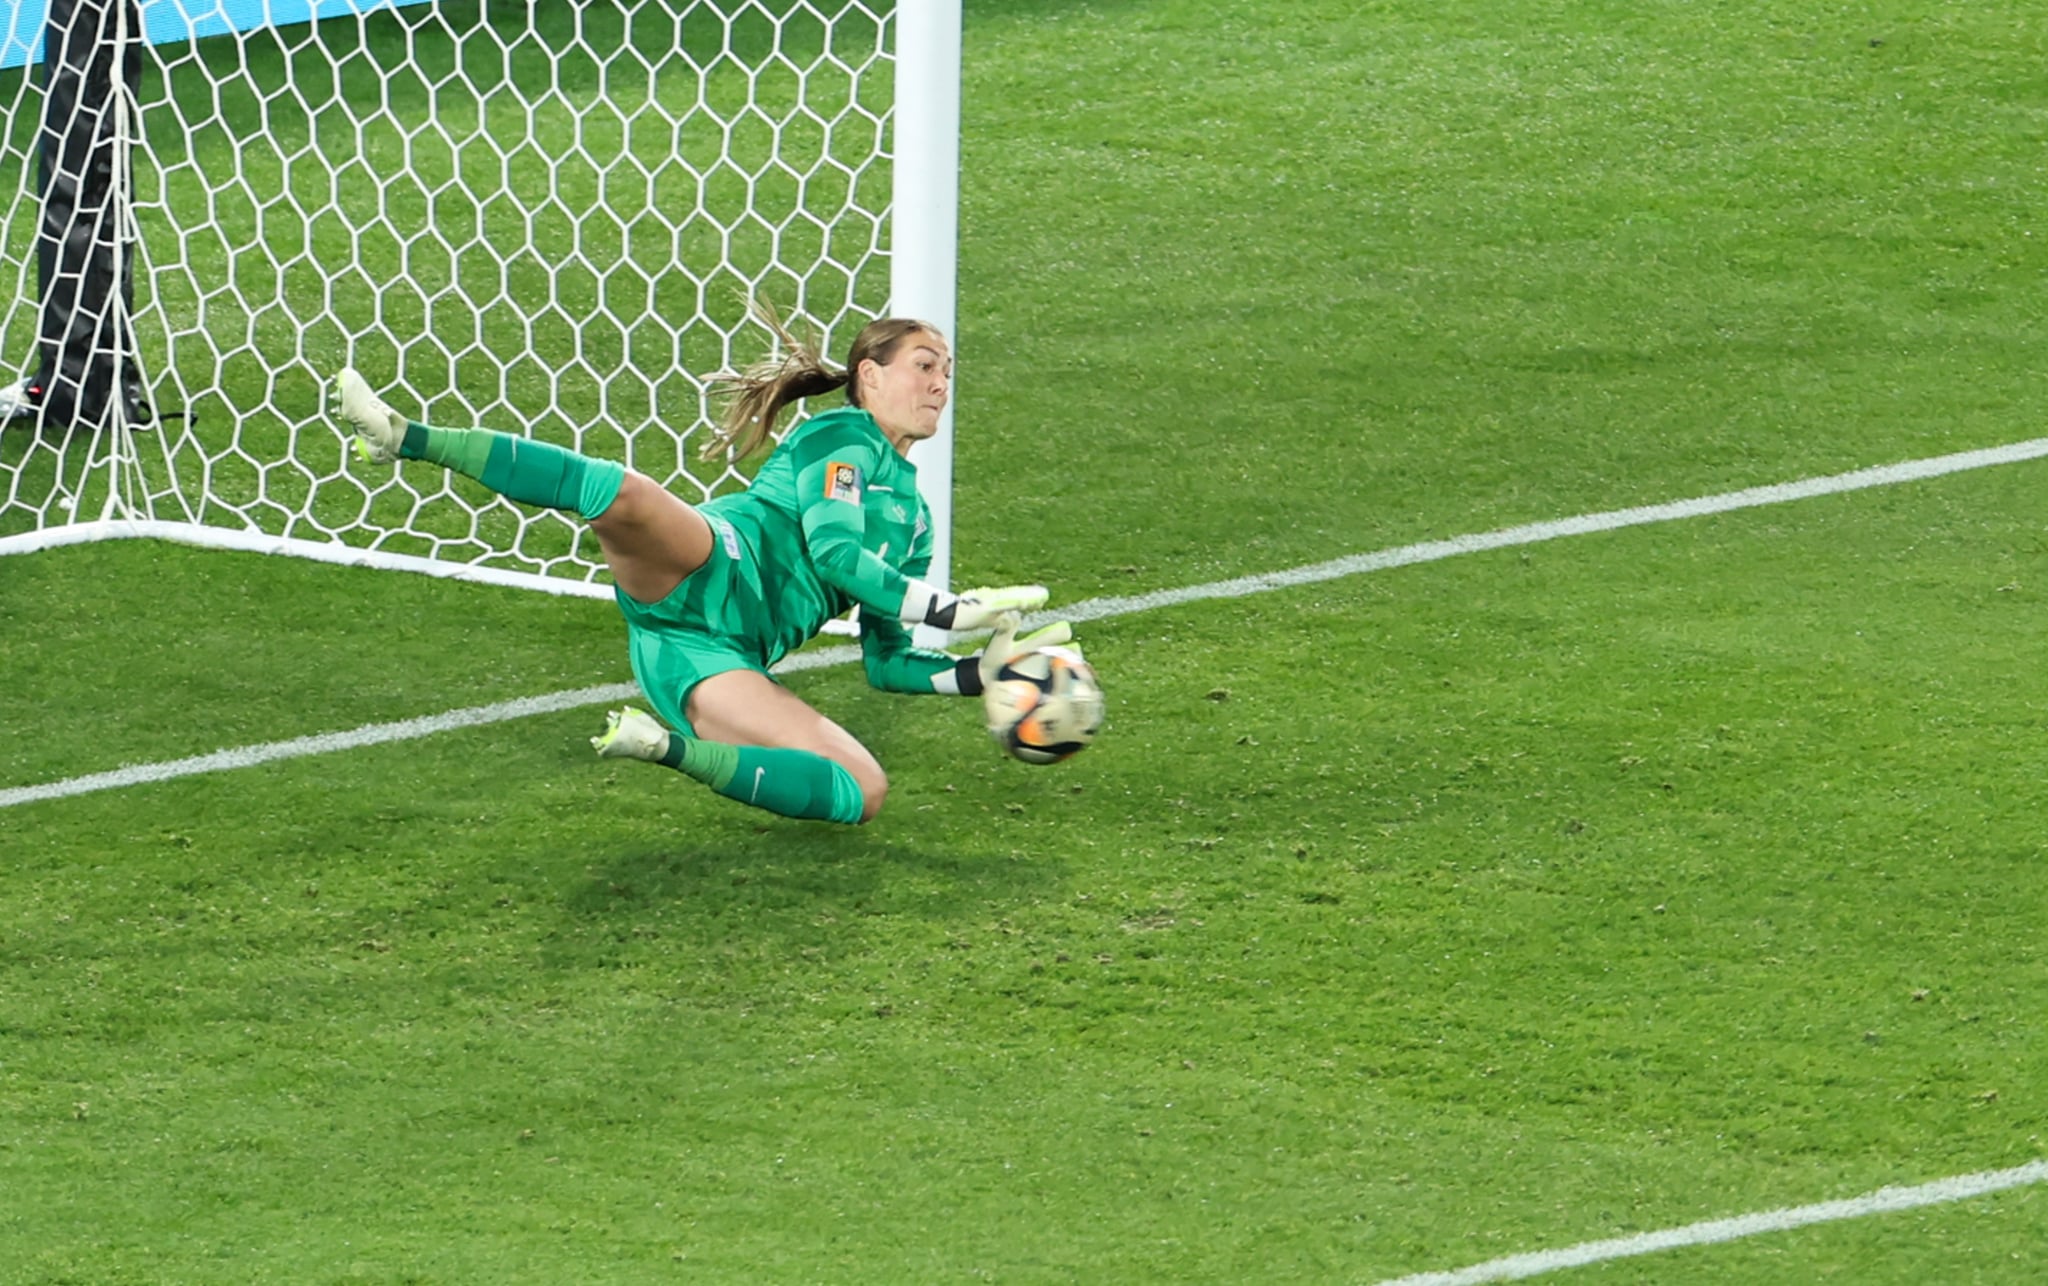 England's goalkeeper Mary Earps makes a save during the Final between Spain and England at the 2023 FIFA Women's World Cup in Sydney, Australia, Aug. 20, 2023. (Photo by Ding Ting/Xinhua via Getty Images)